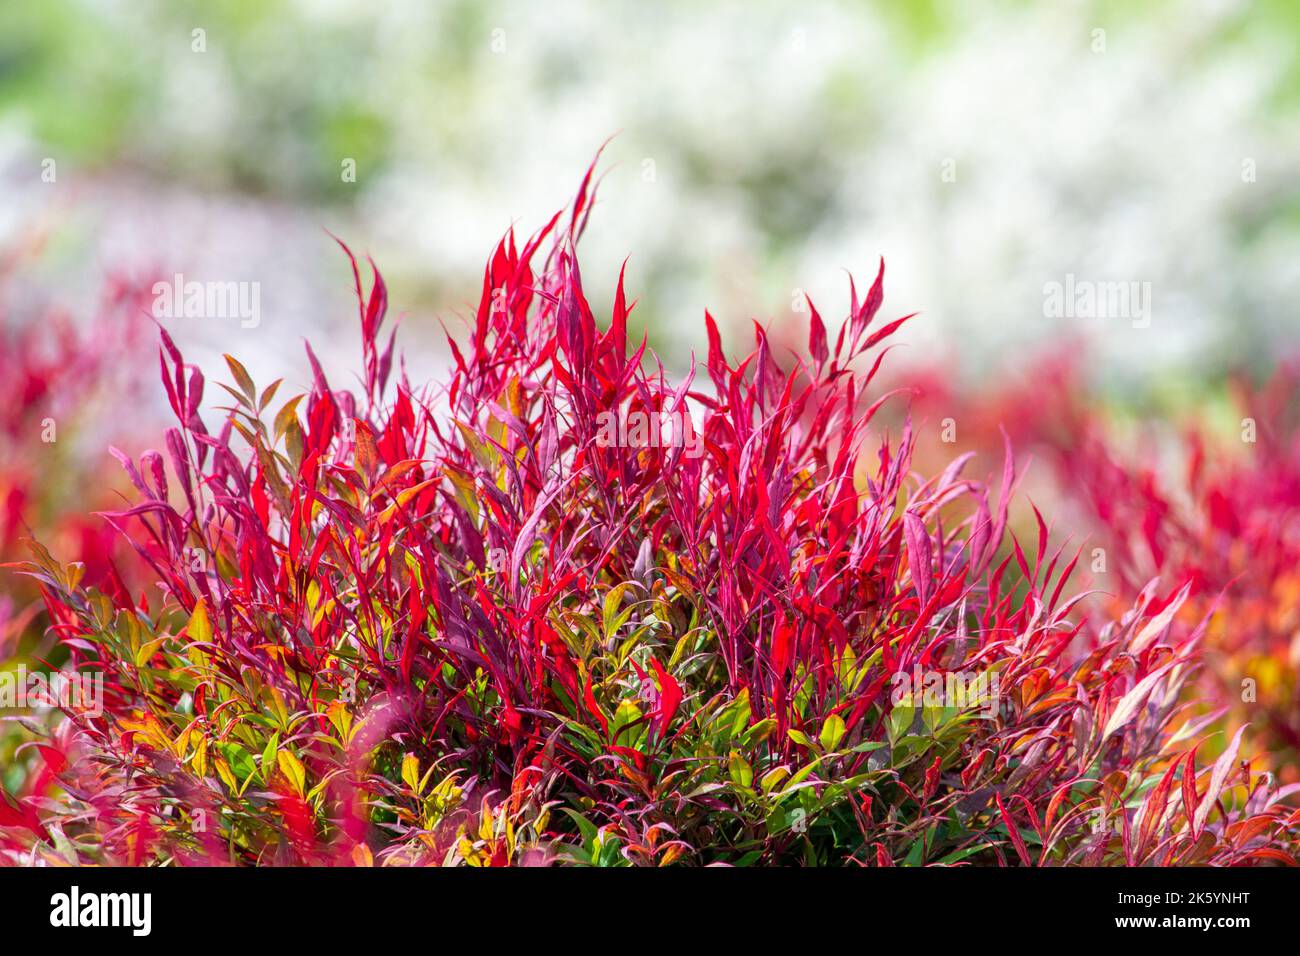 A flush of new, bright red leaves on a Nandina saxifragaceae ‘Colourscape’ plant signifying new spring growth in the garden. Stock Photo